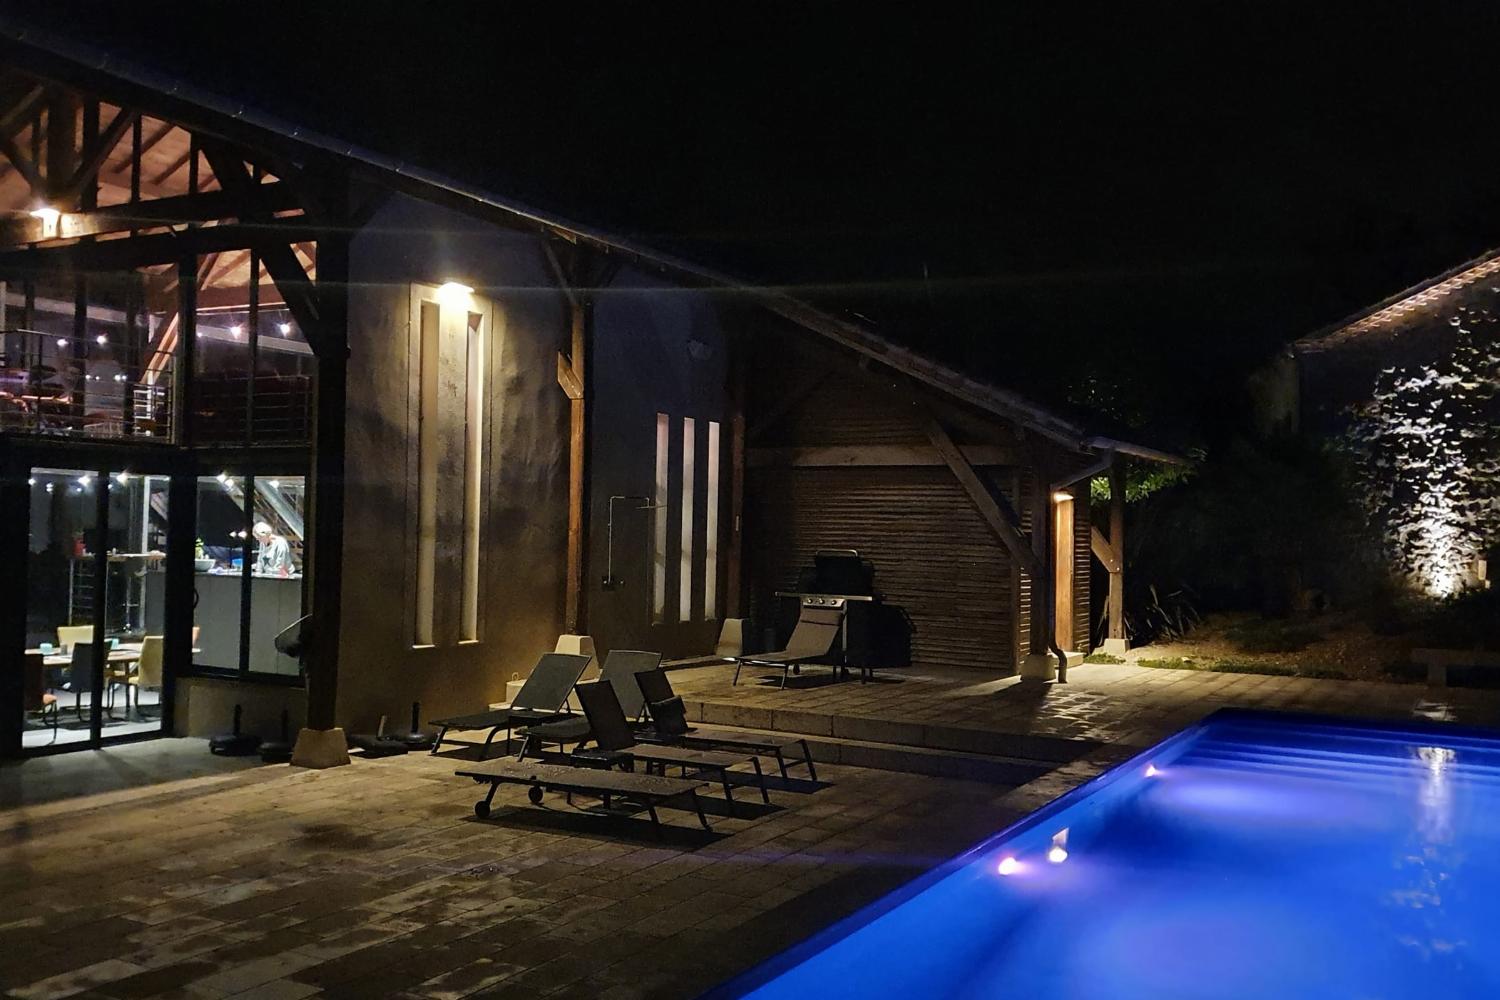 Private pool at night